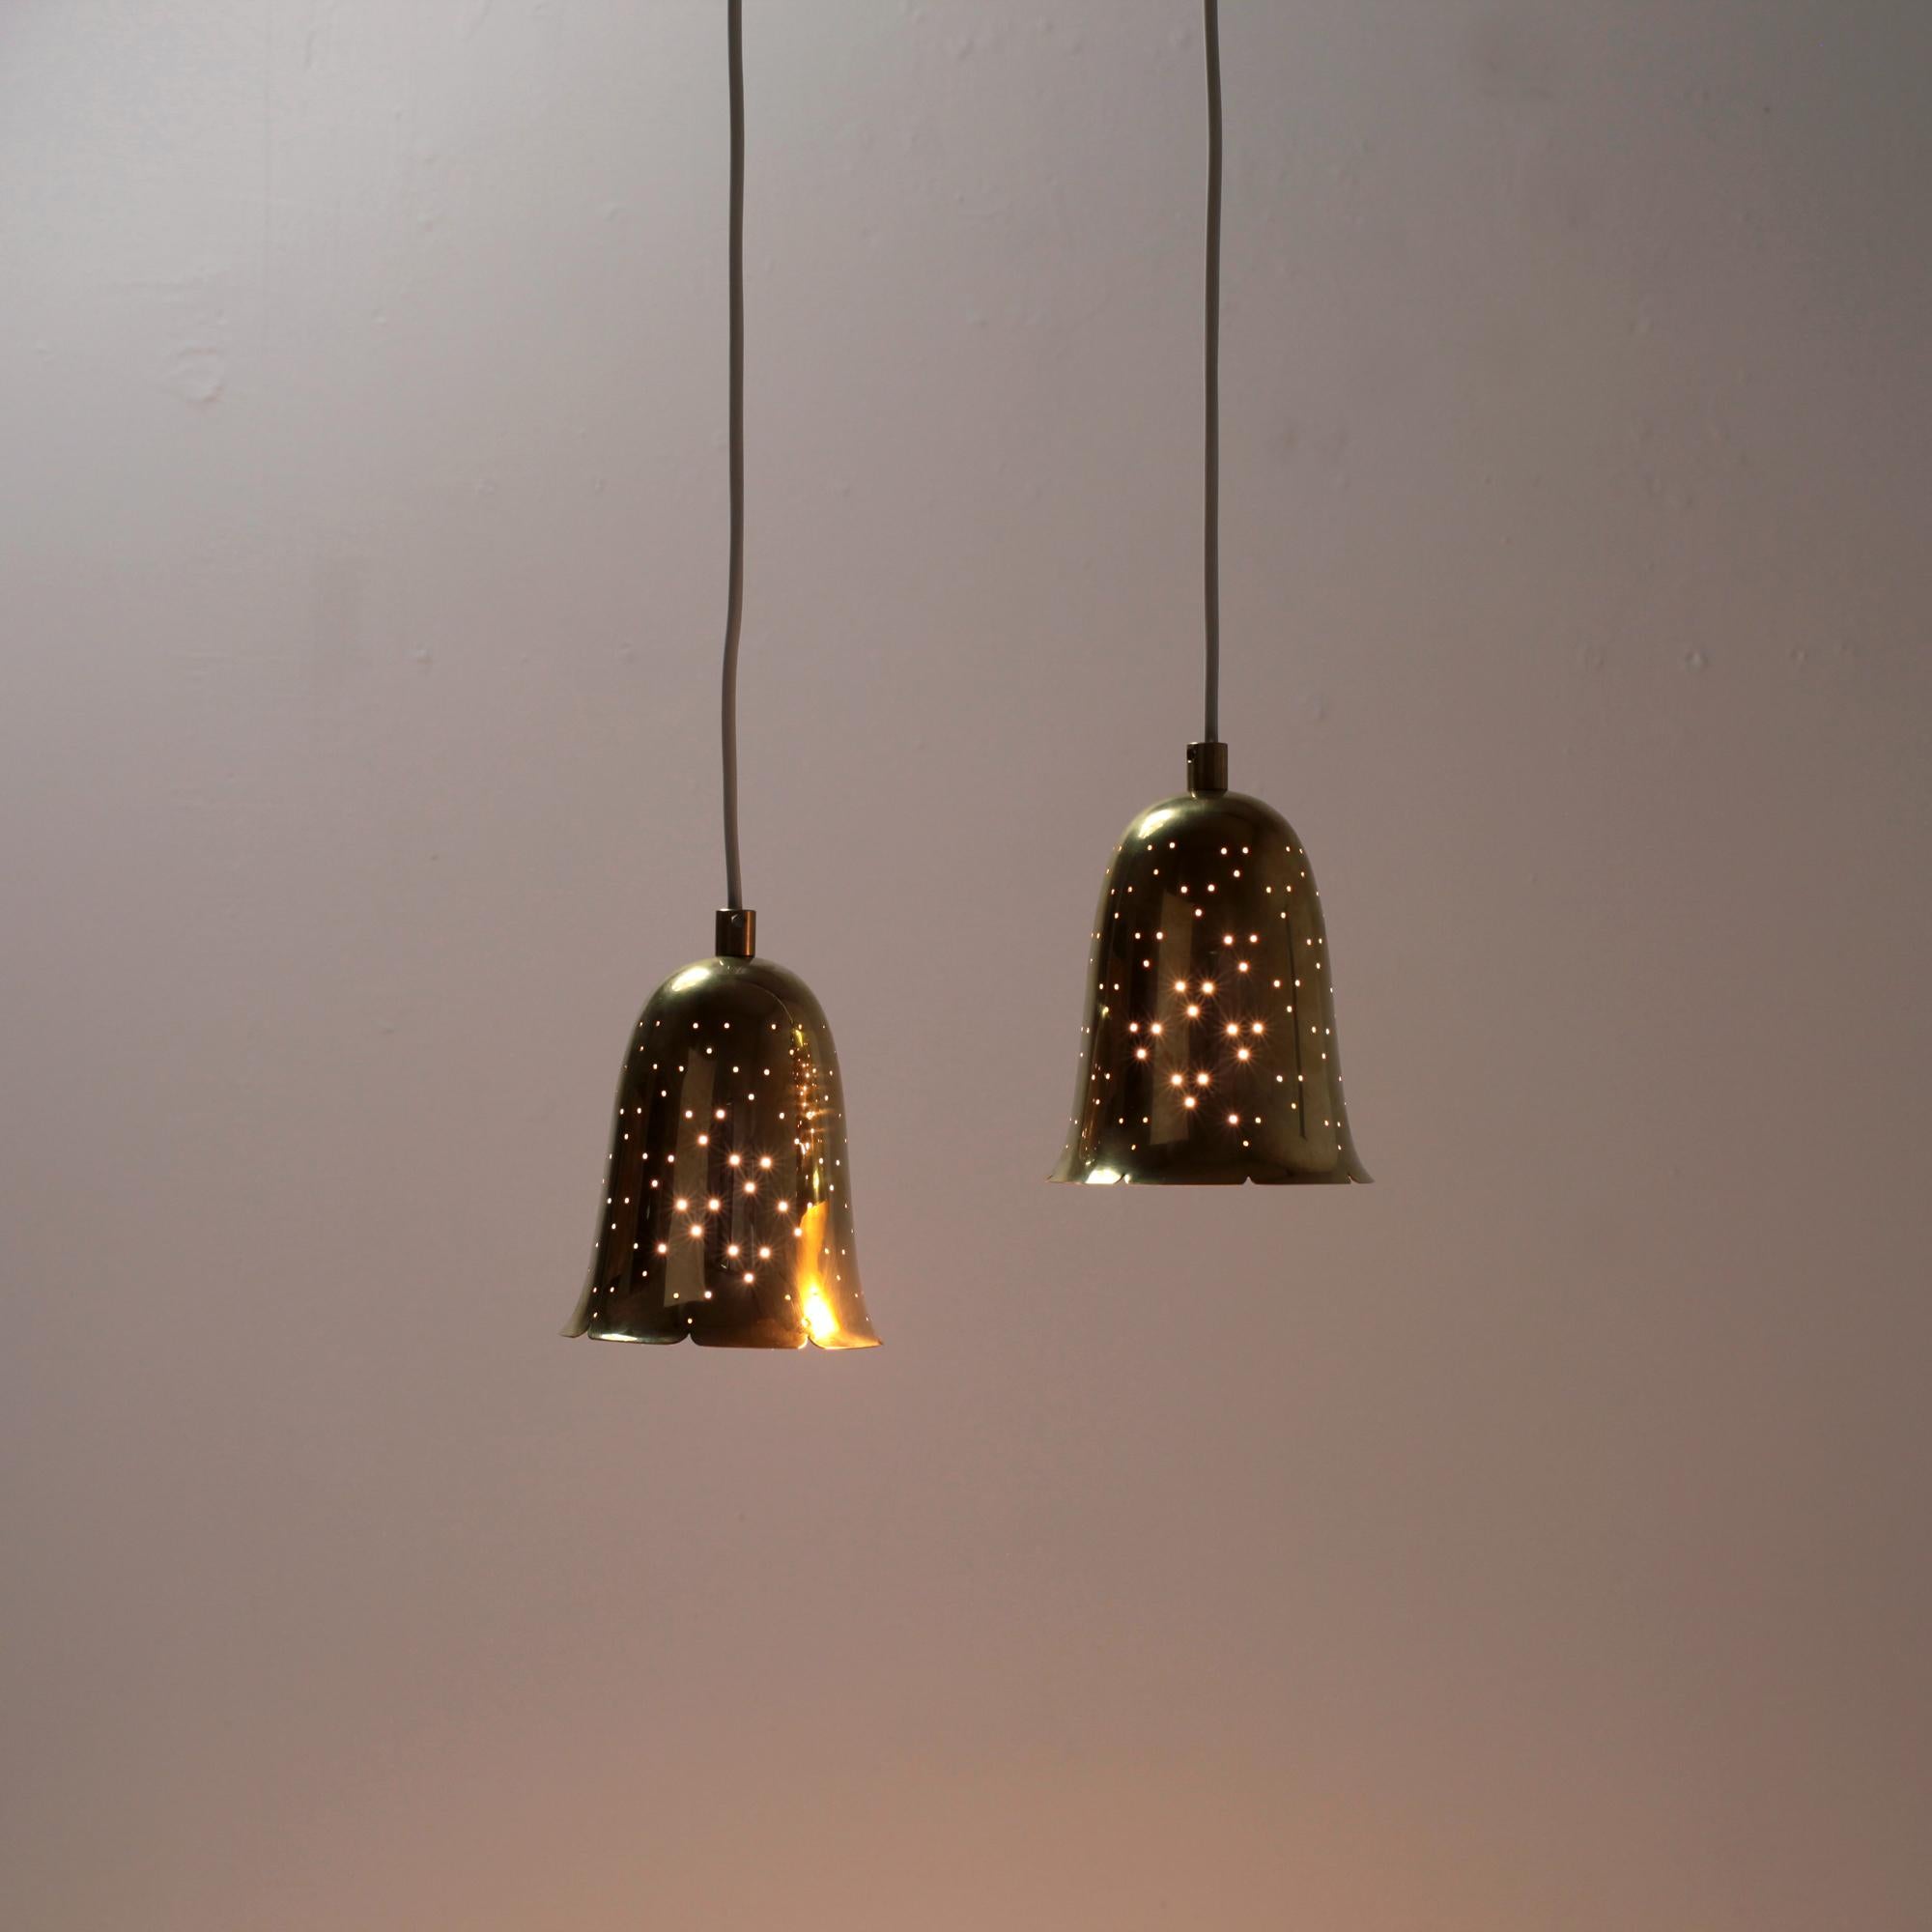 20th Century Pair of Swedish Modern Perforated Brass Pendants By Boréns Sweden, 1950s